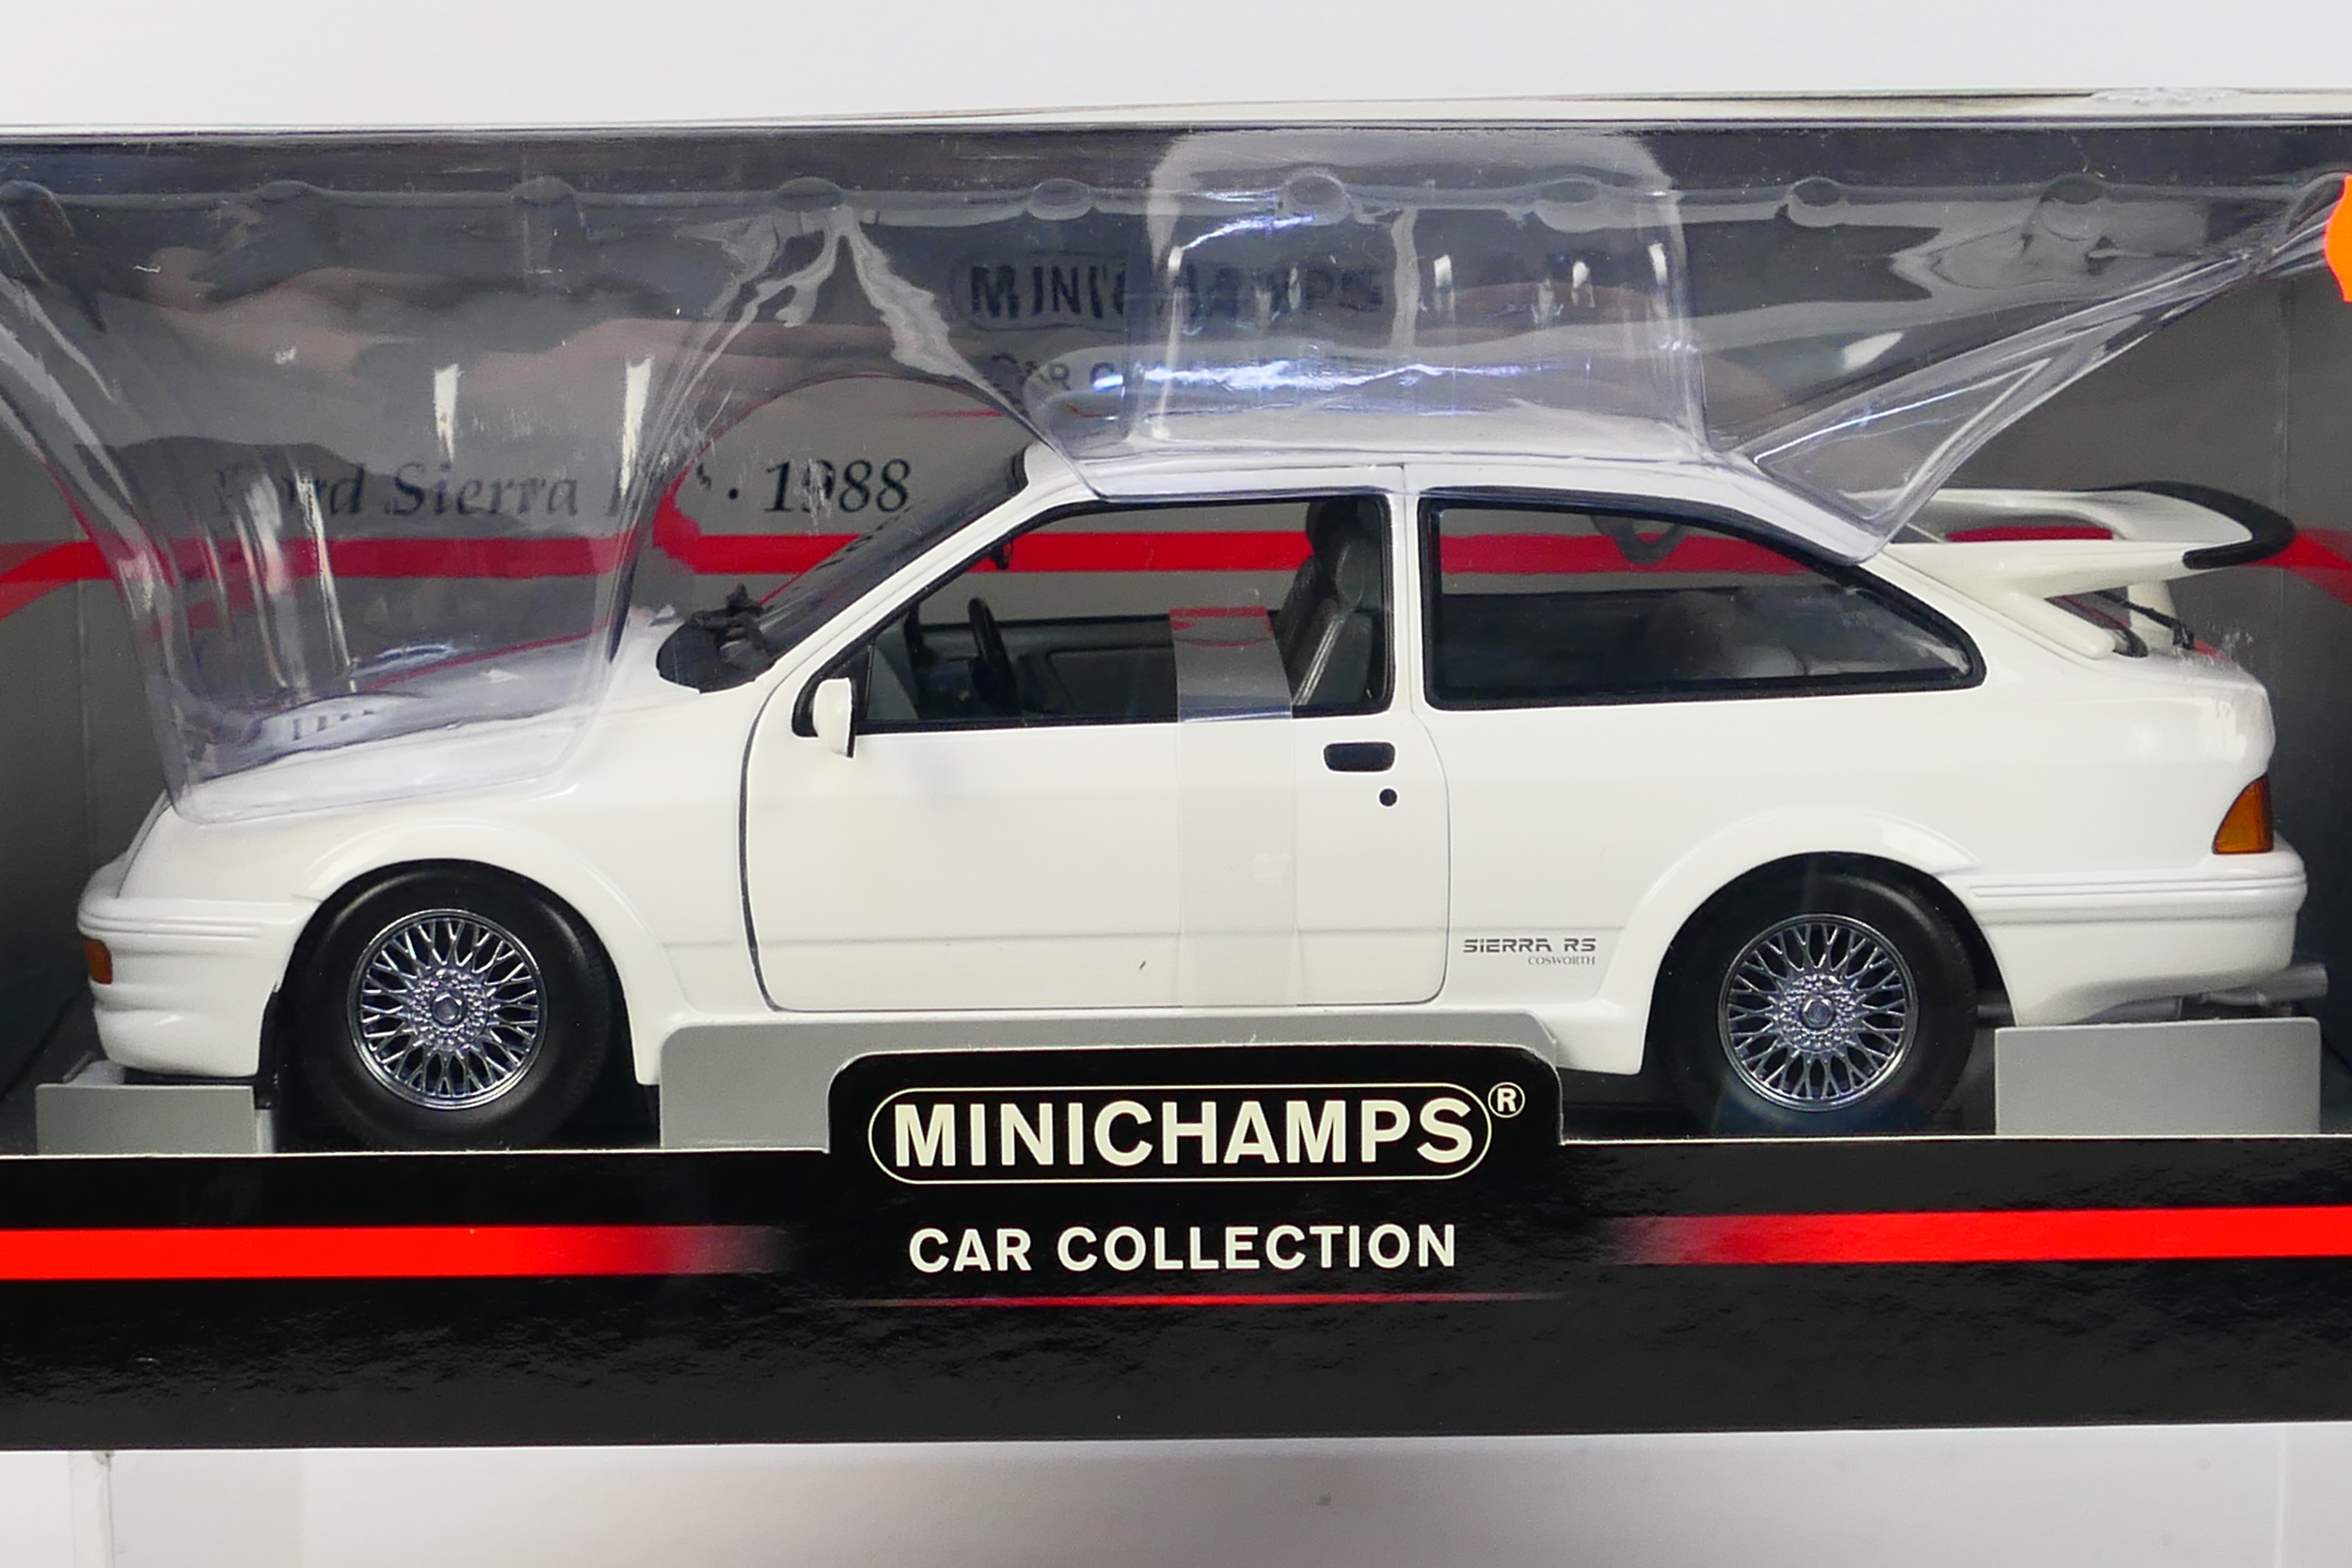 Minichamps - A boxed Minichamps #150084070 1:18 scale 1988 Ford Sierra RS Cosworth RHD. - Image 2 of 3